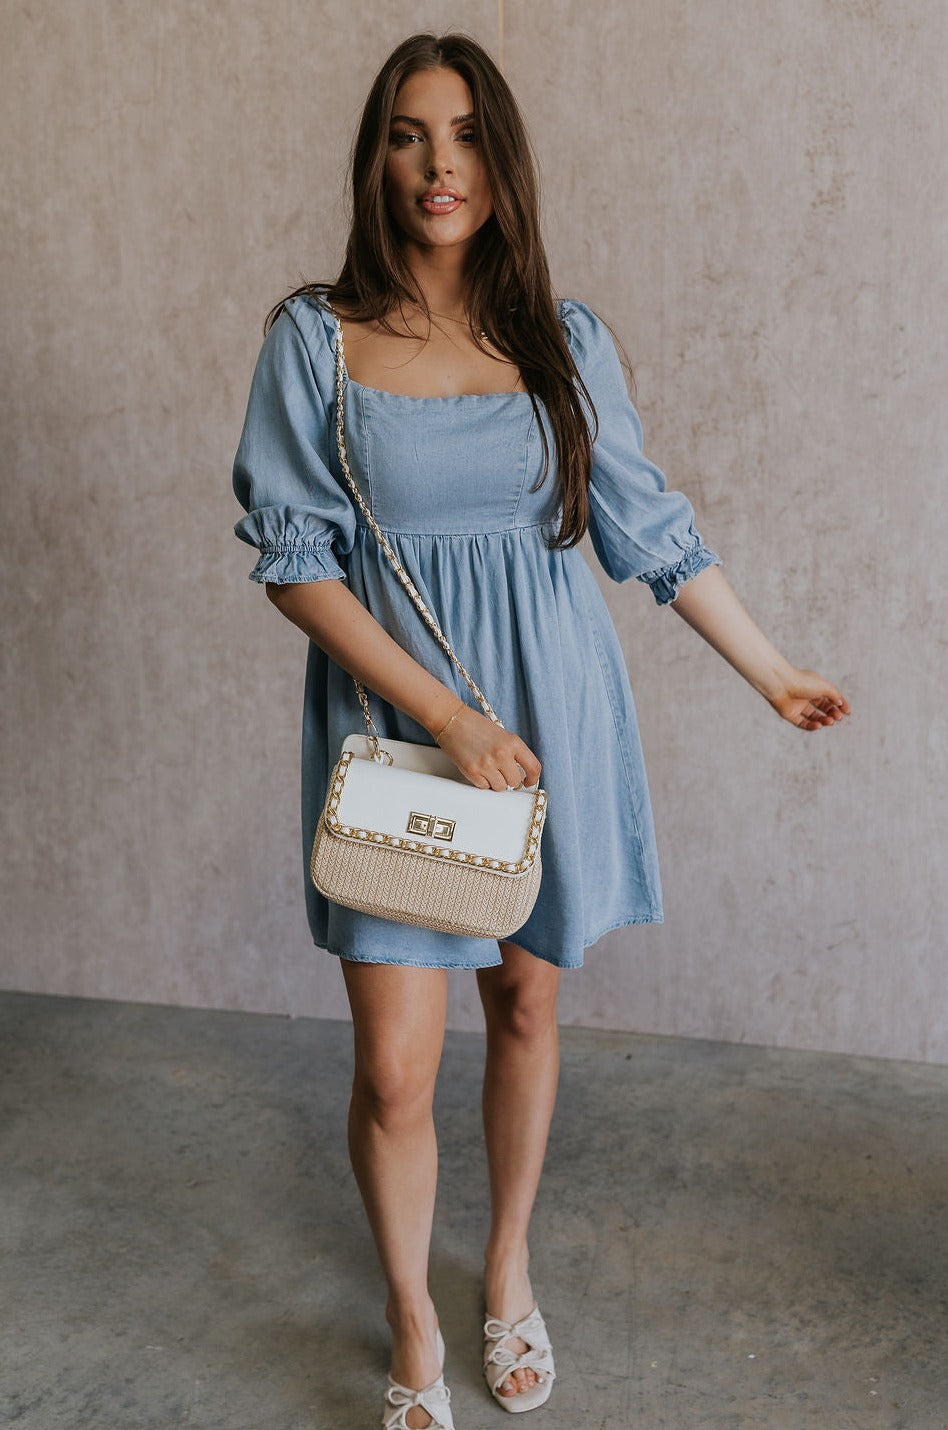 Full body view of female model wearing the Hallie Light Chambray Mini Dress which features Light Chambray Tencel Fabric, Mini Length, Square Neckline, Half Sleeves with Ruffle Hem Details and Smocked Back